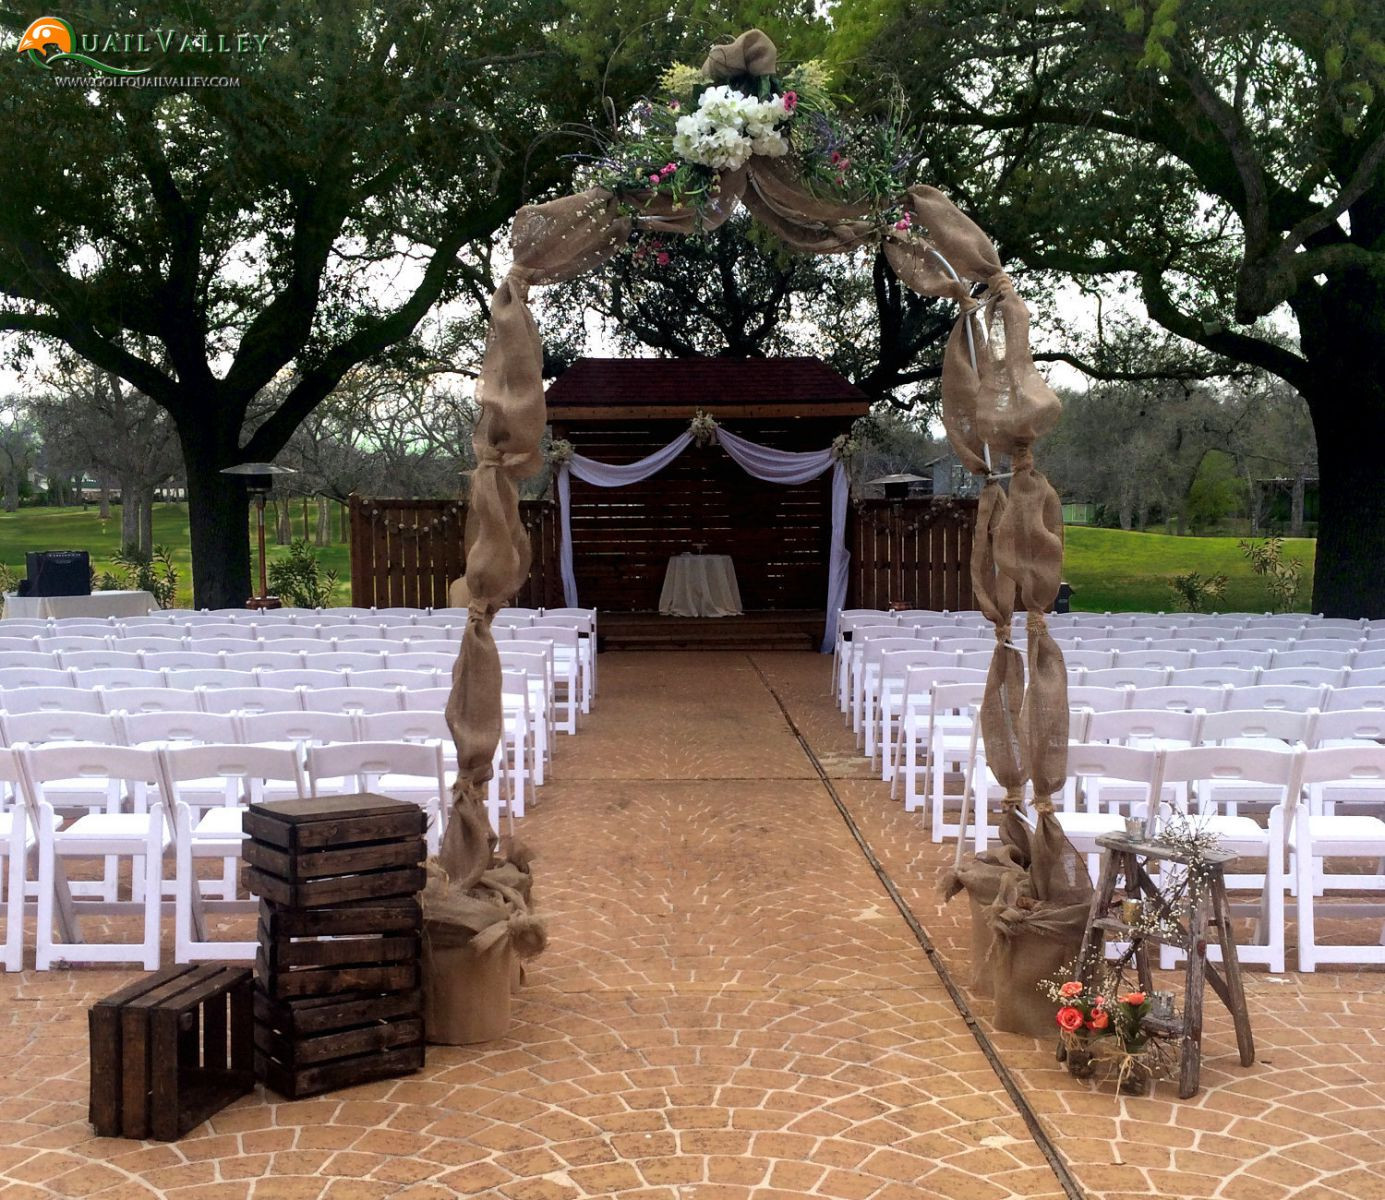 Outdoor Wedding Venues In Houston
 The Beautiful Wedding Venue at Quail Valley in Houston TX